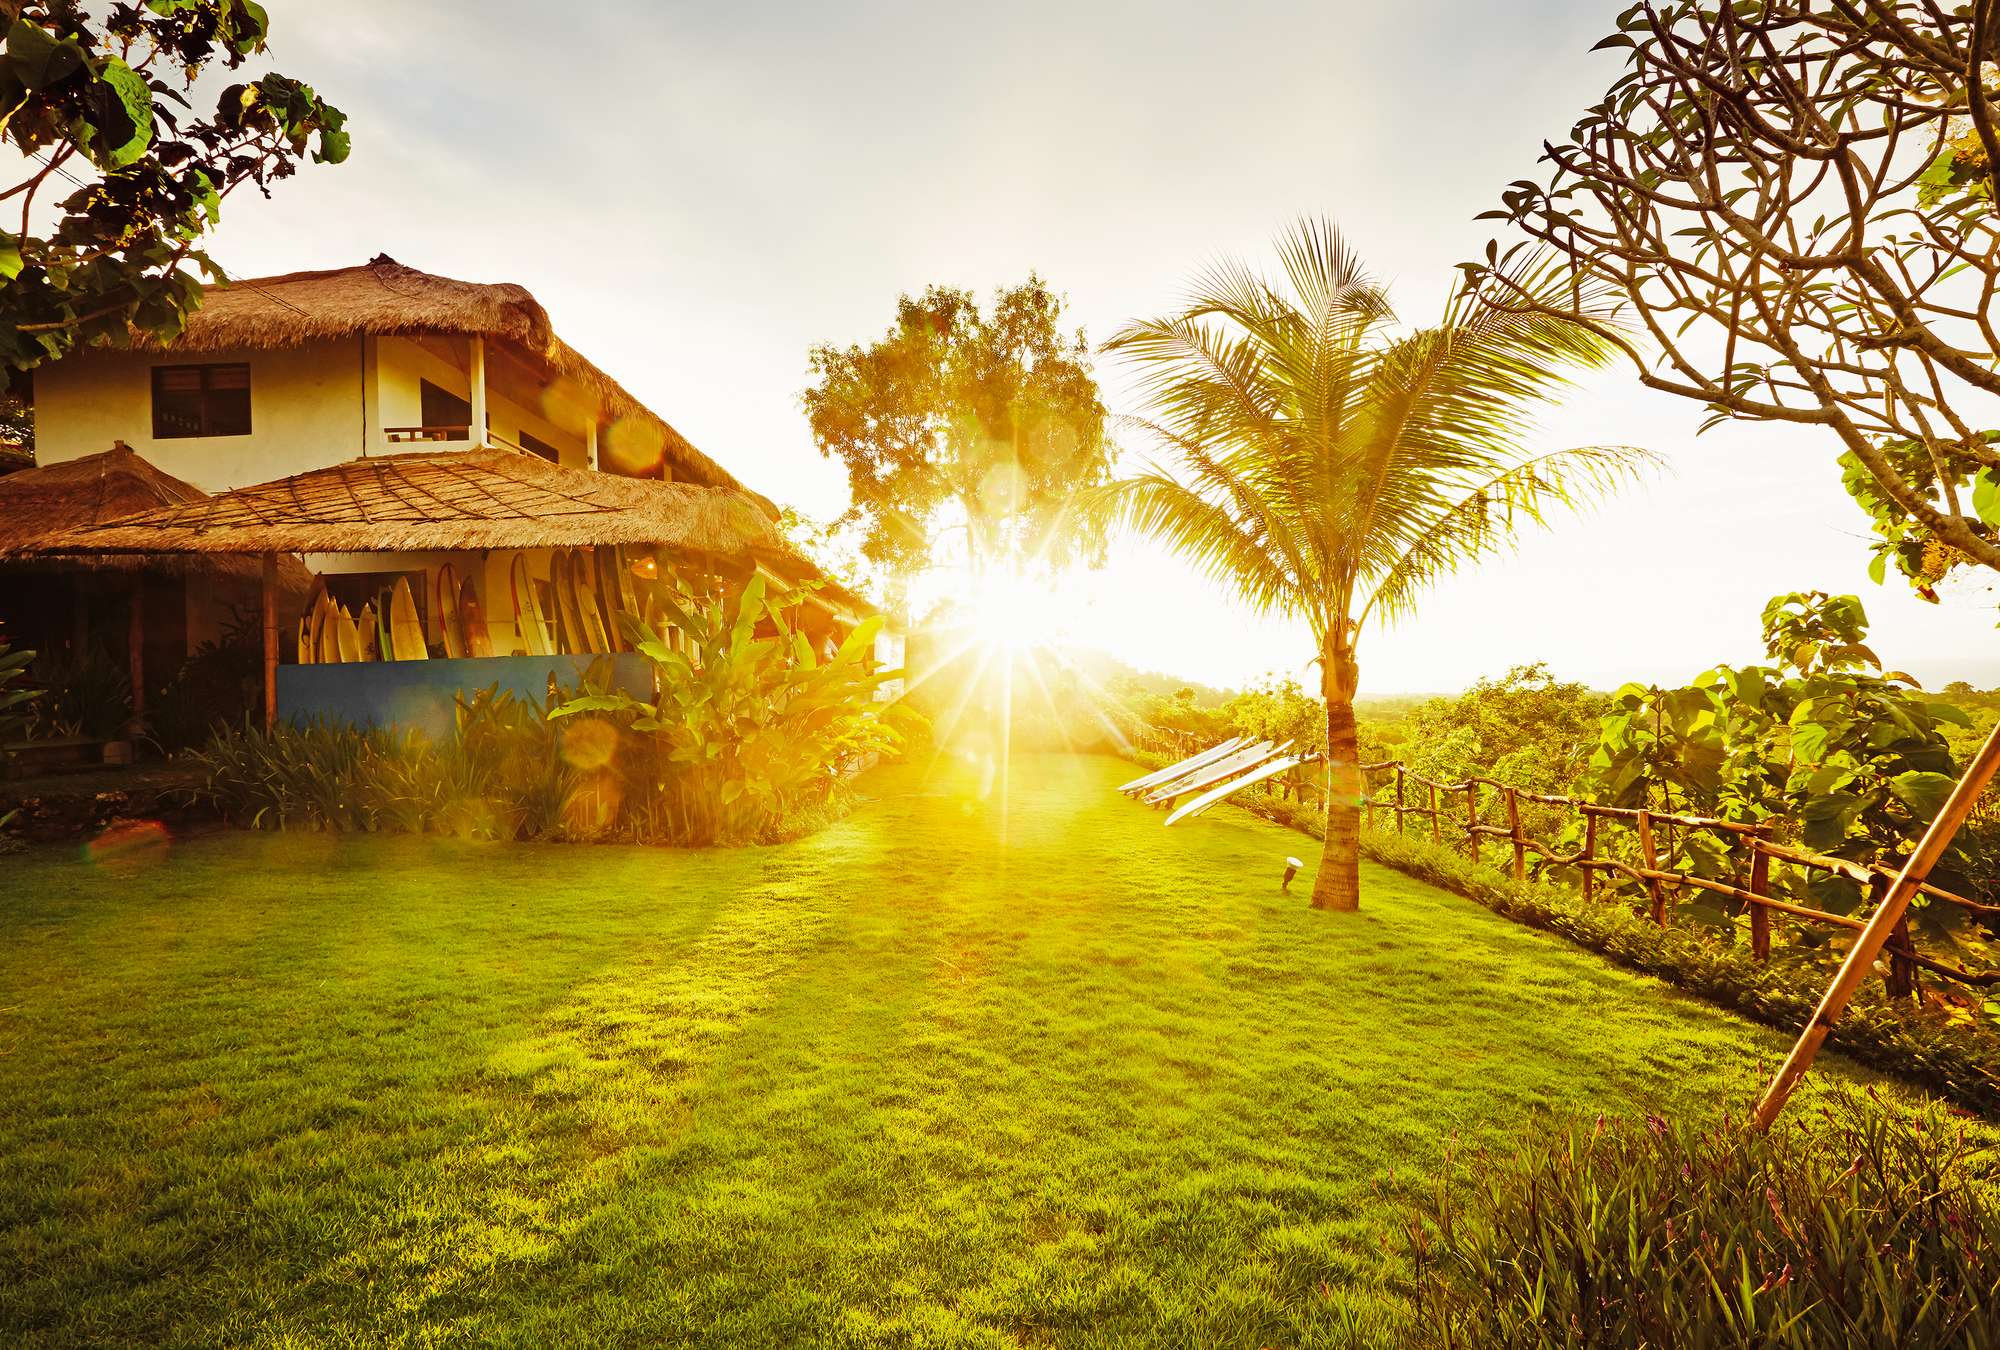             Photo wallpaper Life in Bali - log cabin with palm garden
        